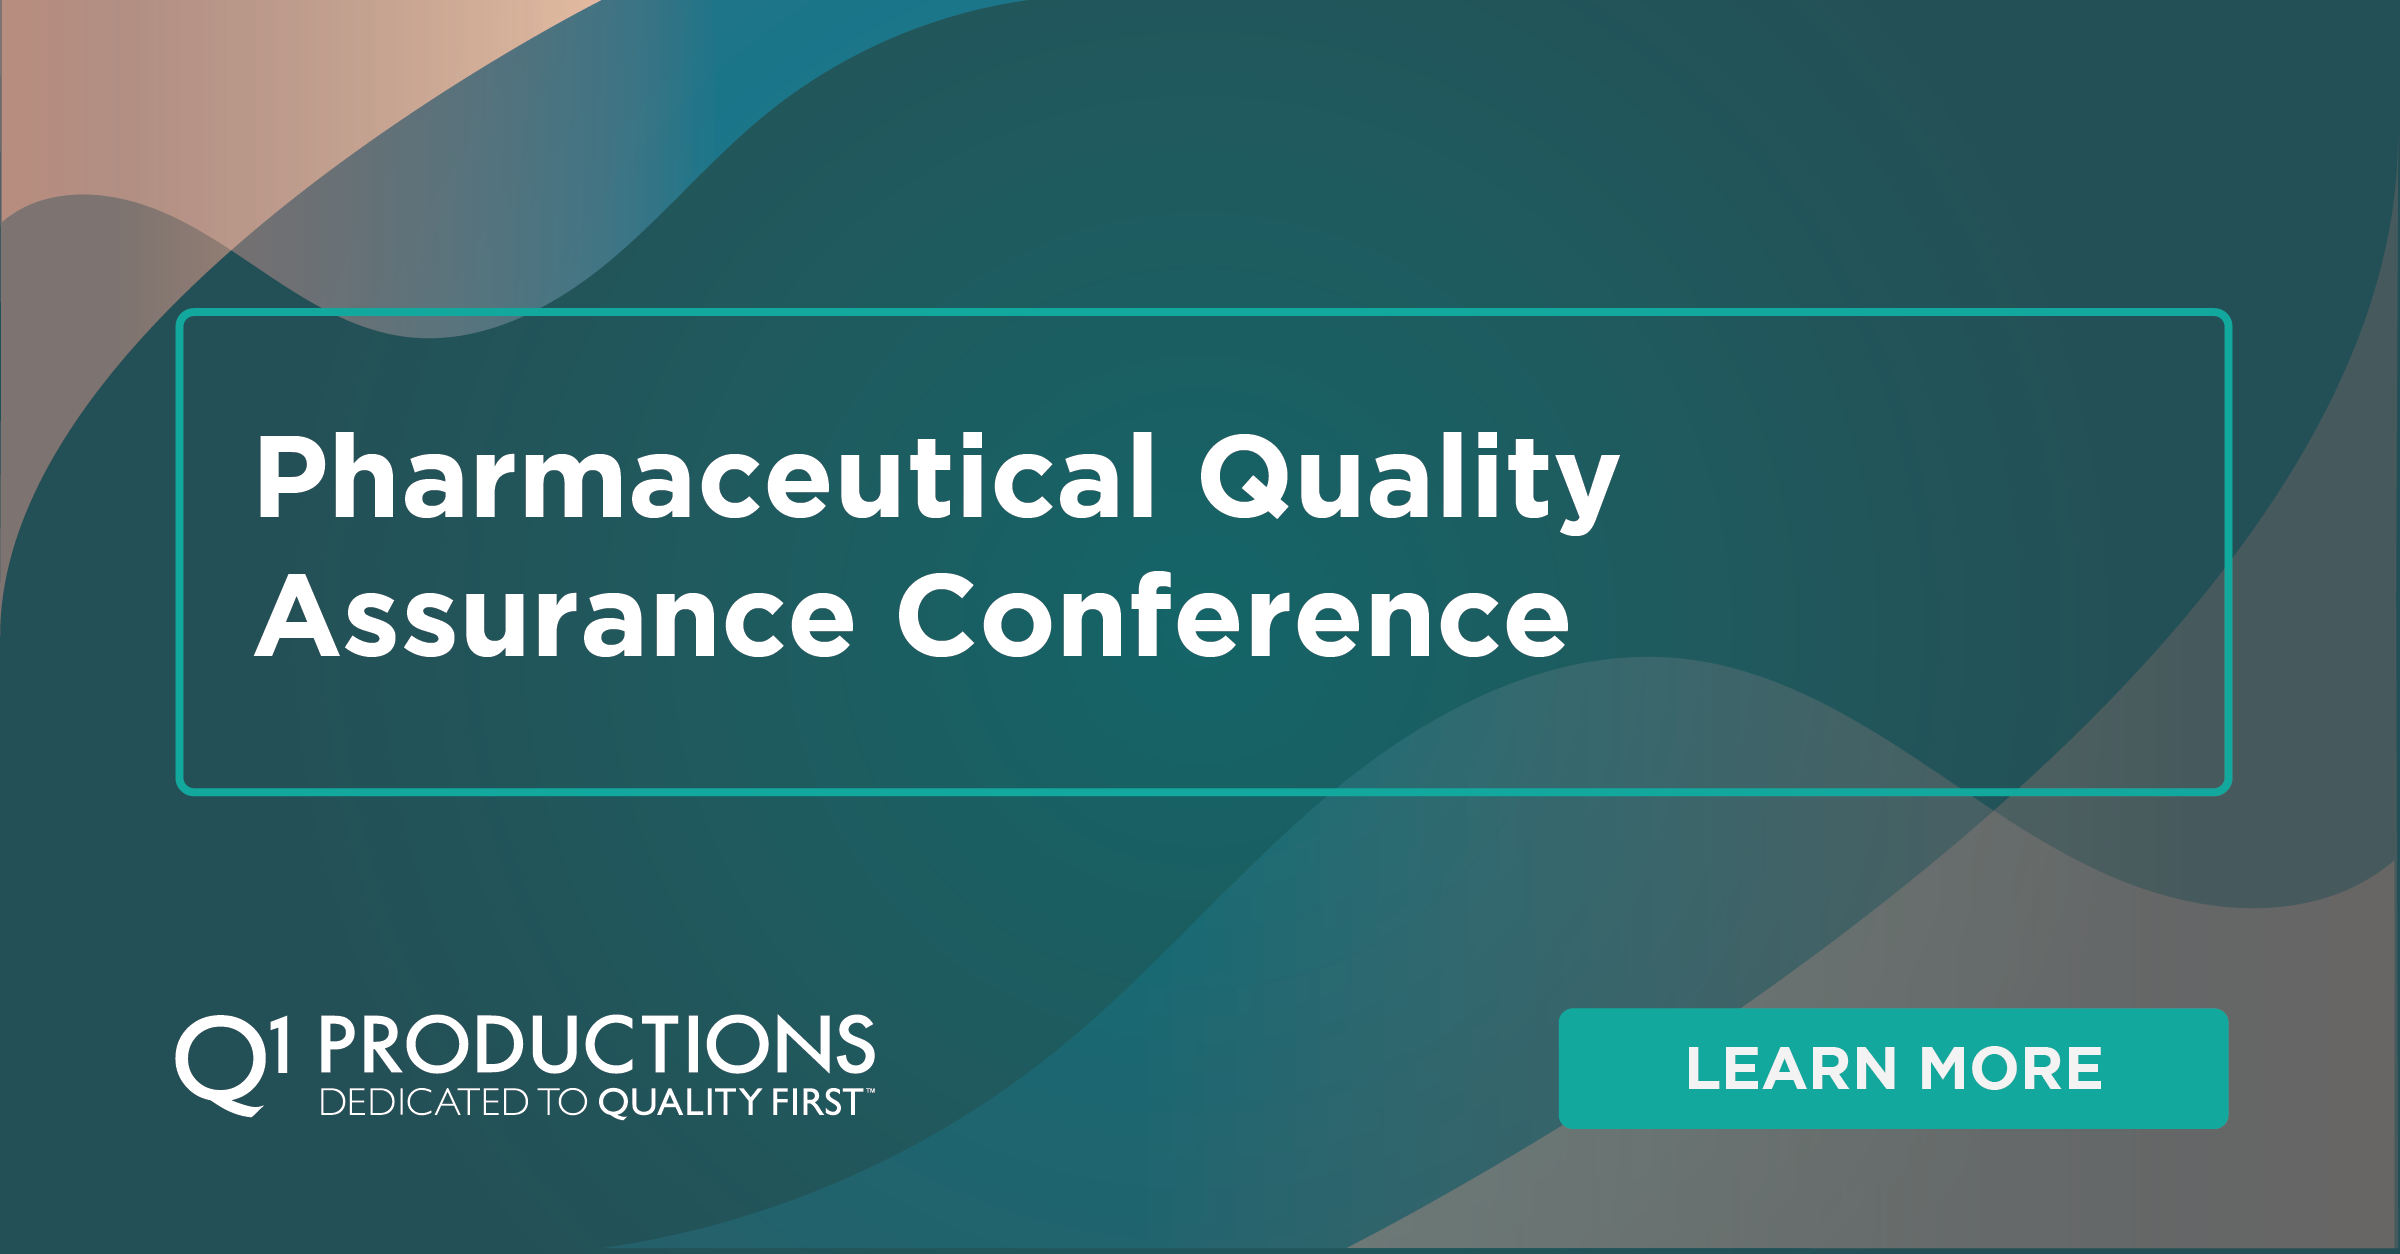 Pharmaceutical Quality Assurance Conference Q1 Productions